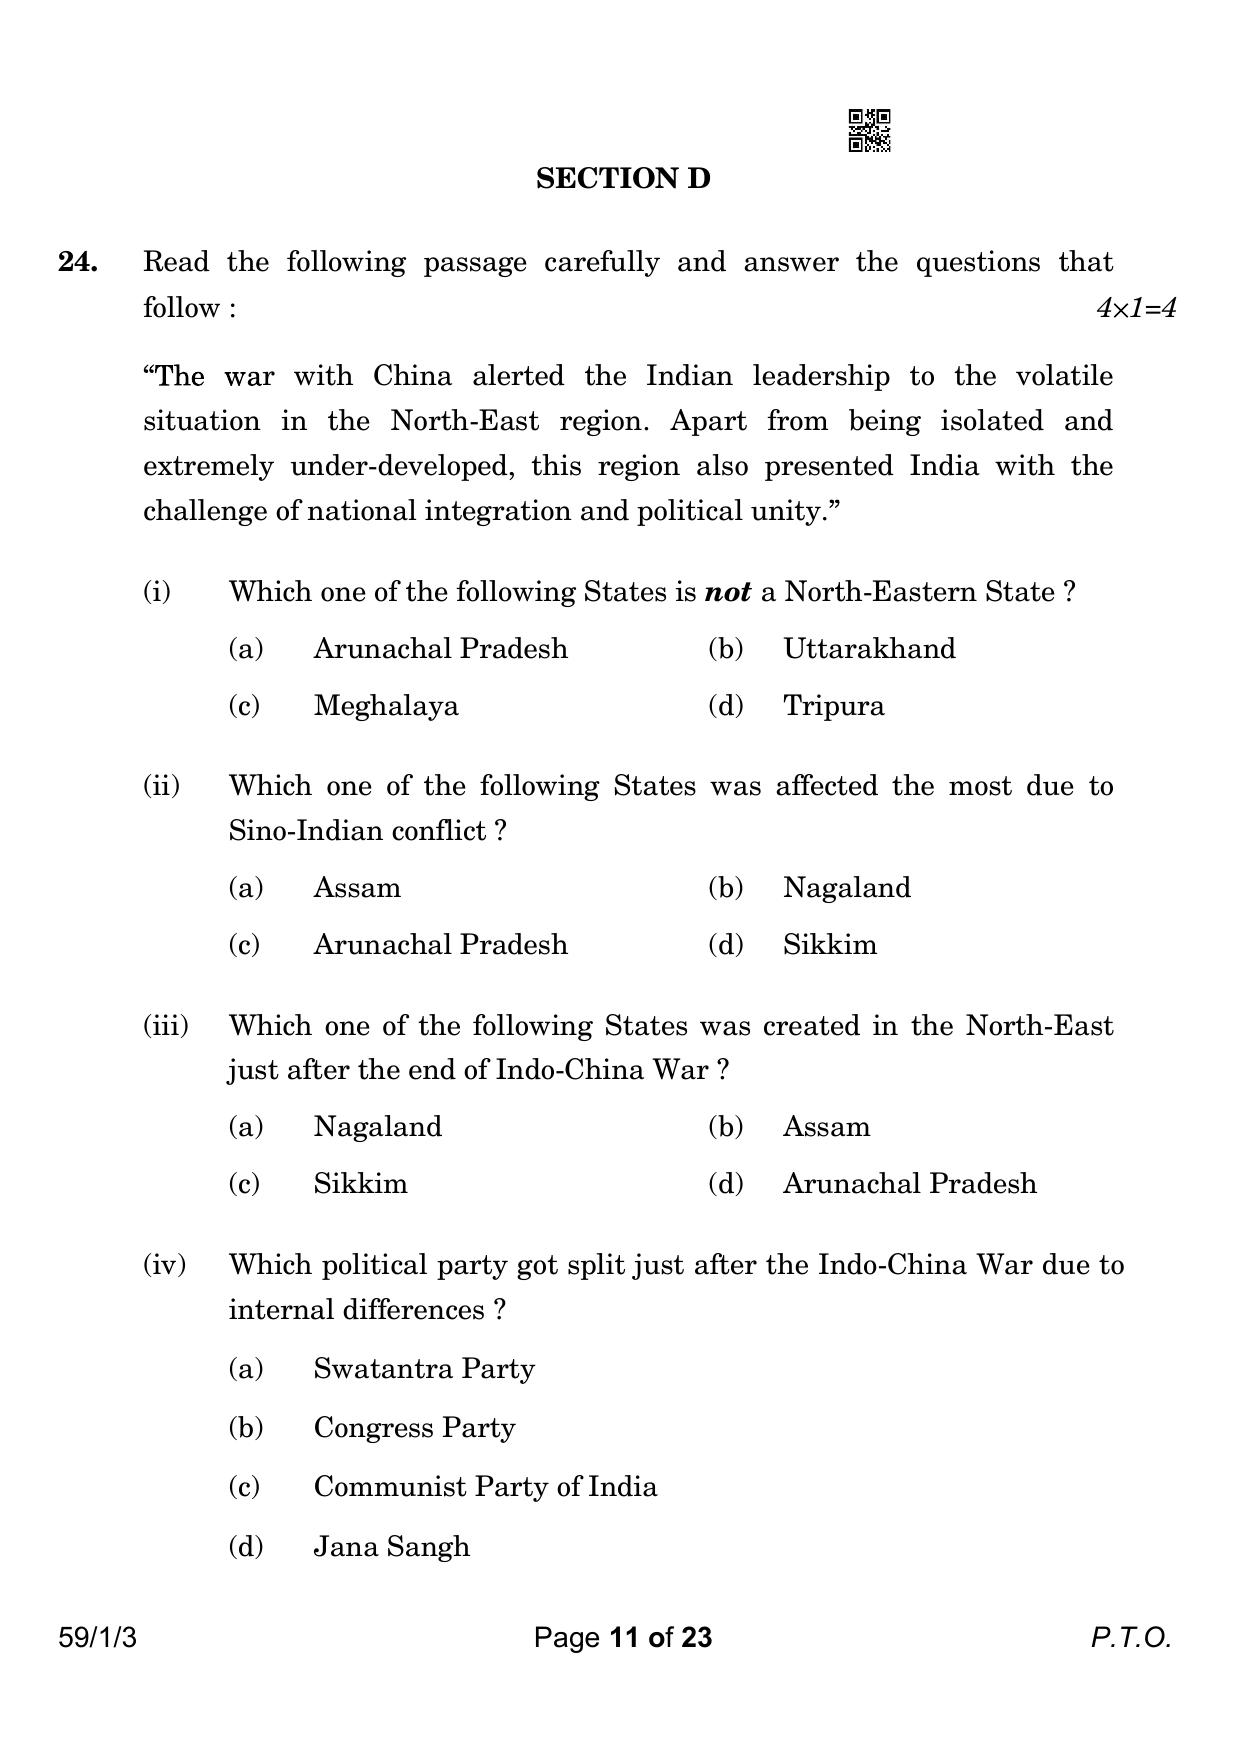 CBSE Class 12 59-1-3 Political Science 2023 Question Paper - Page 11